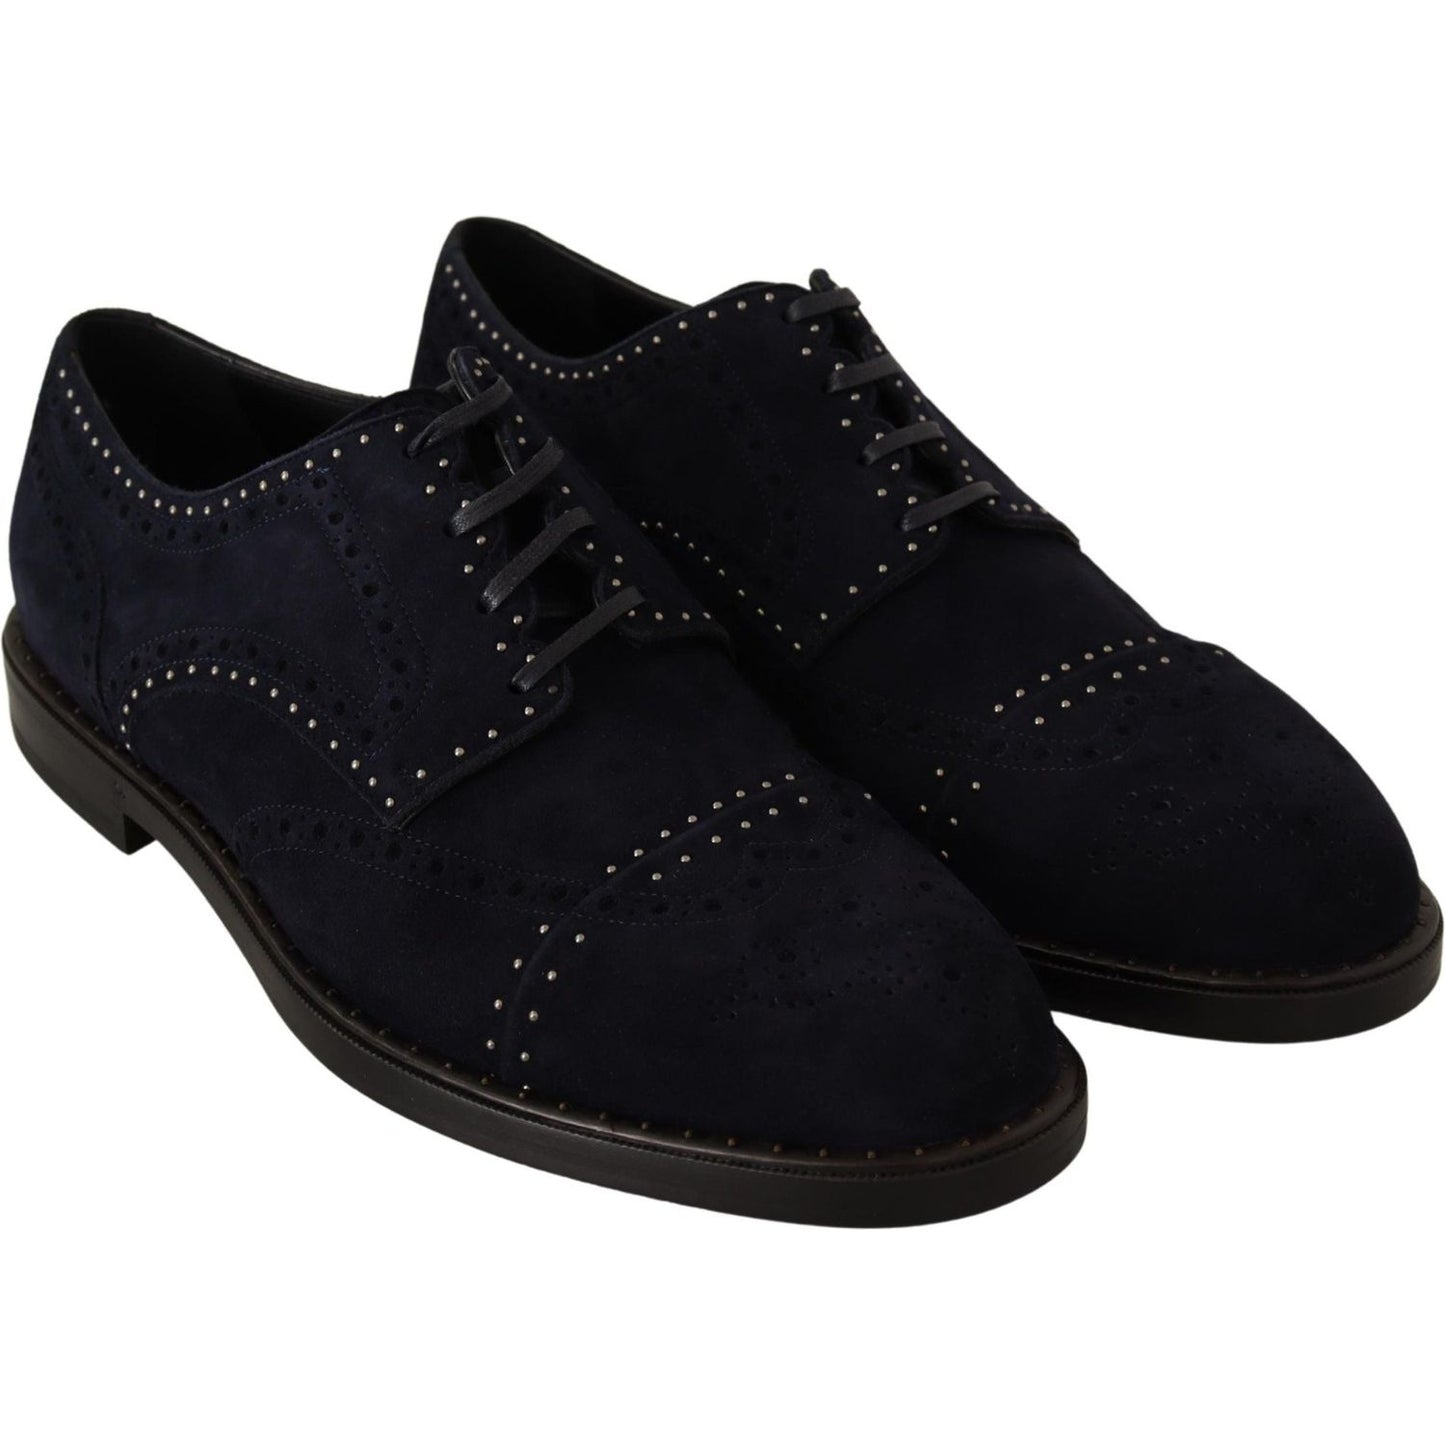 Dolce & Gabbana Elegant Suede Derby Shoes with Silver Studs Dress Shoes blue-suede-leather-derby-studded-shoes